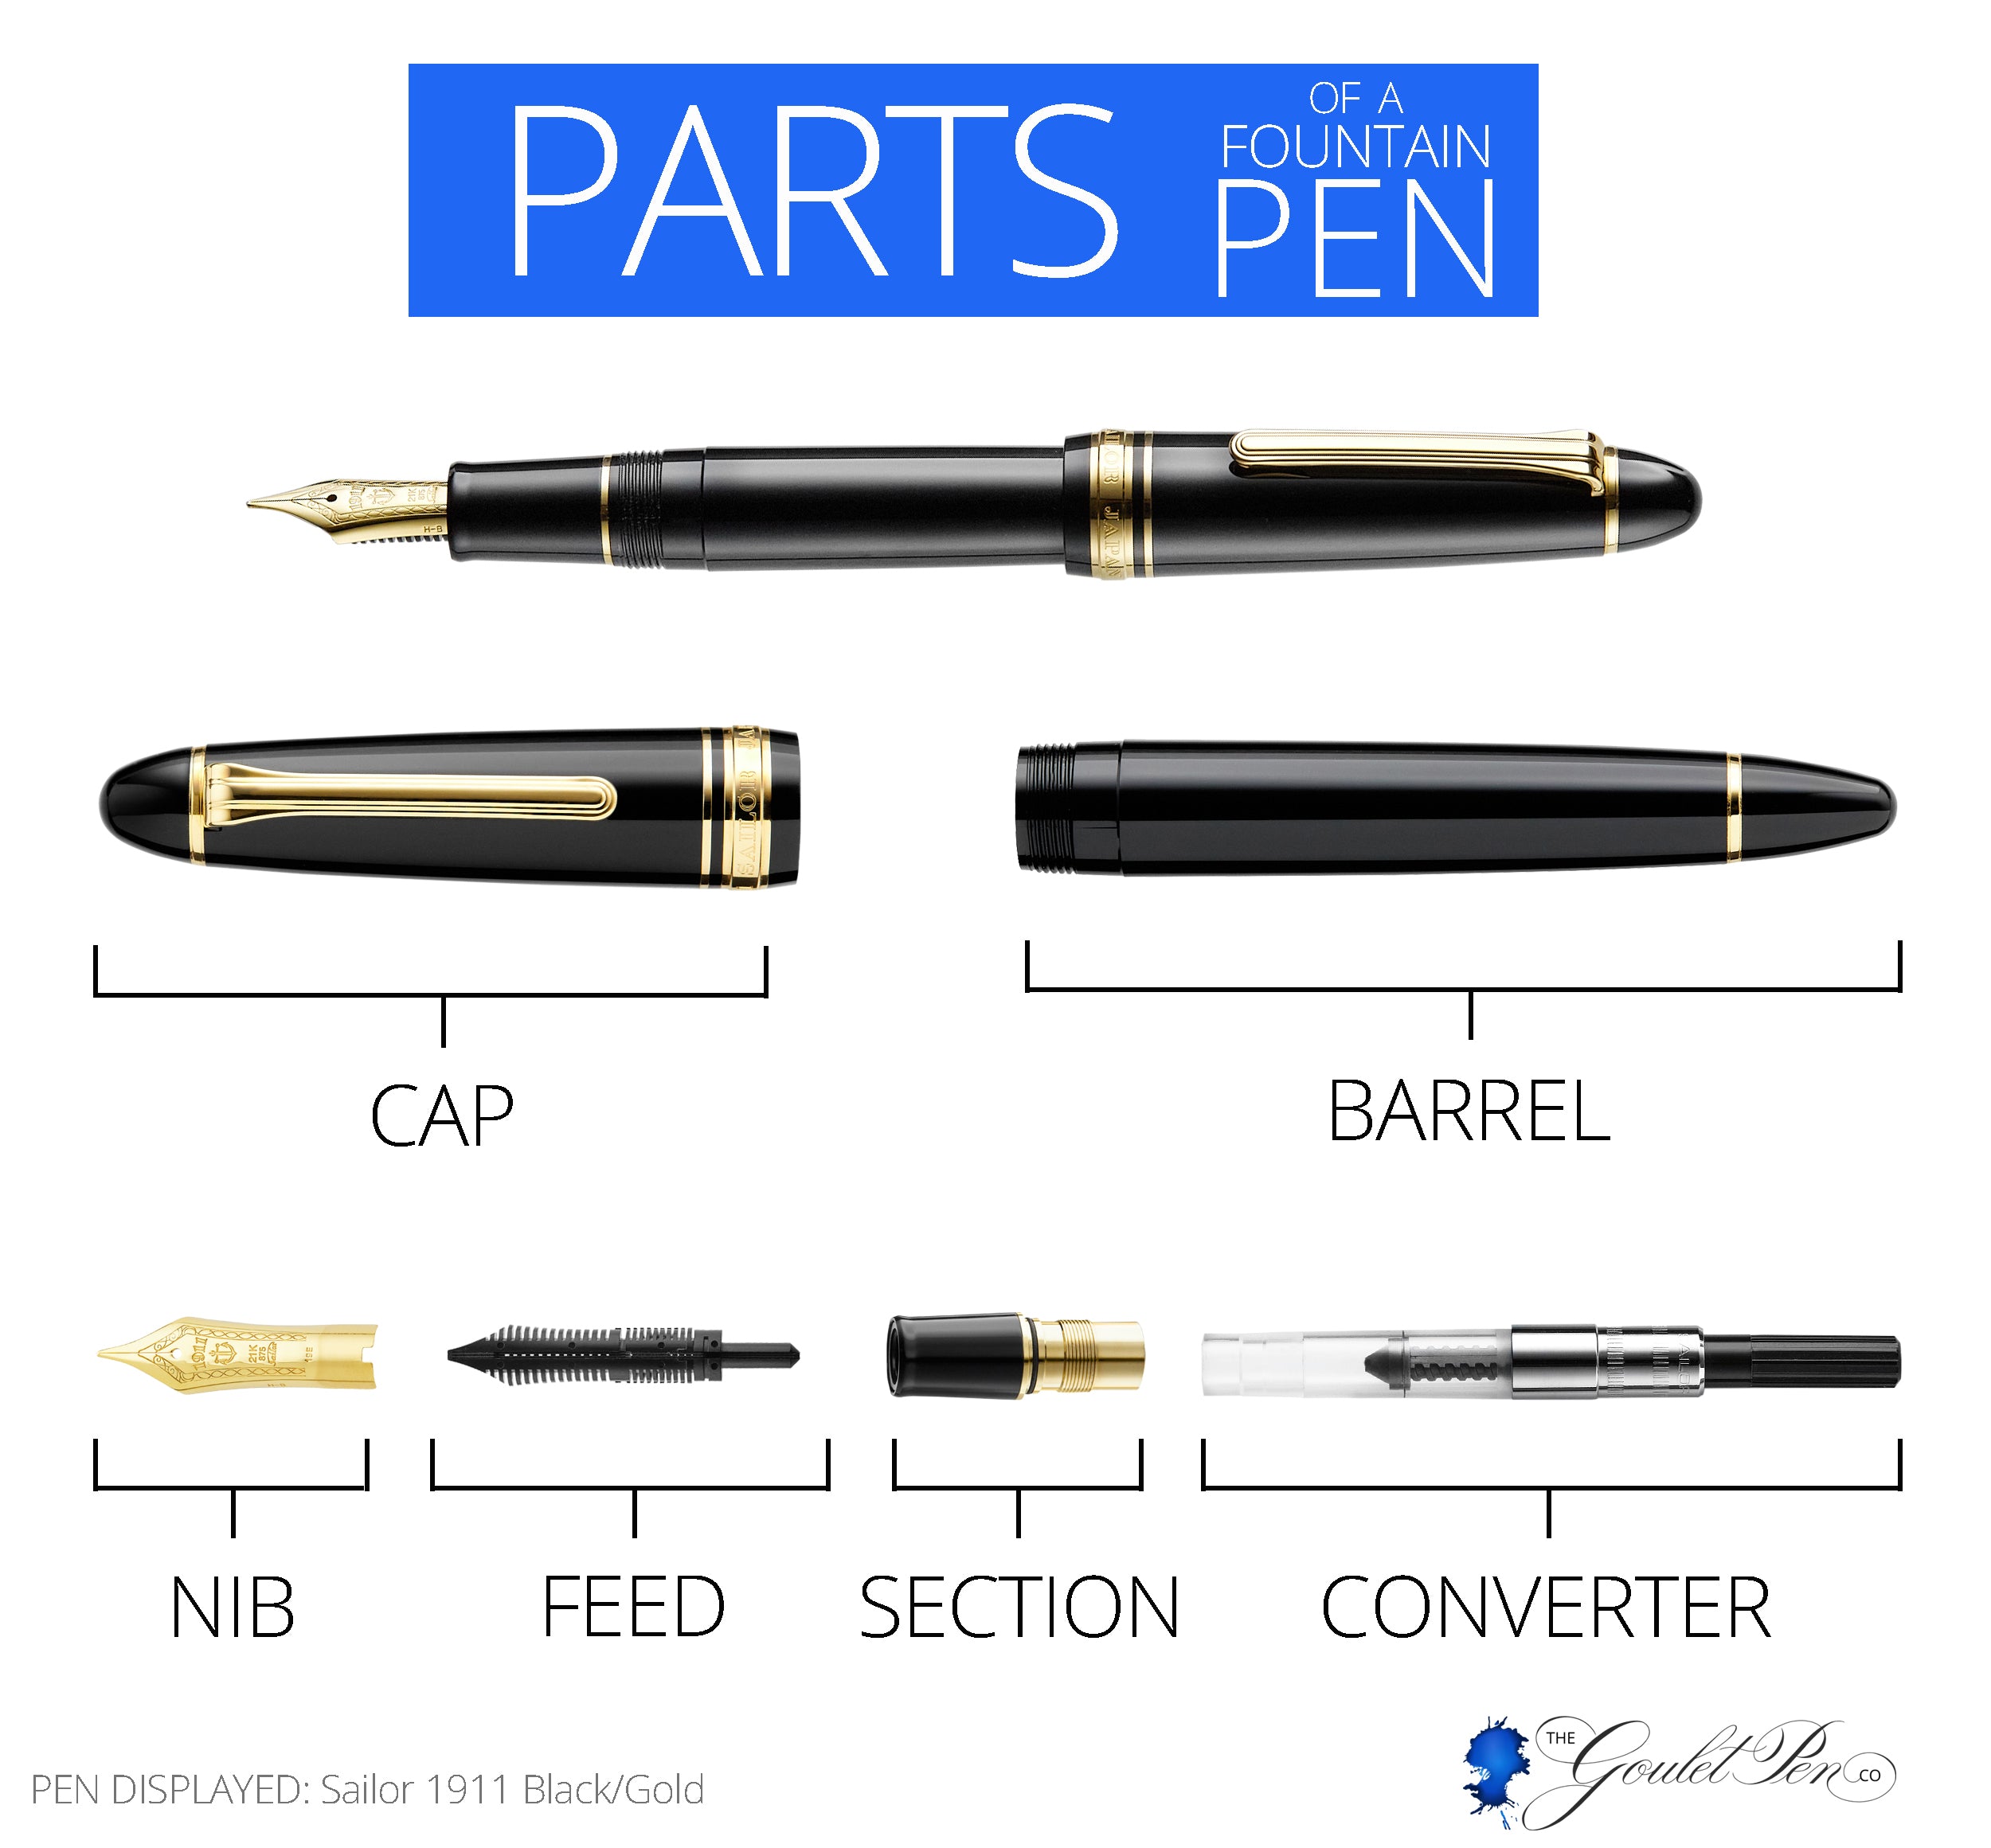 Infographic showing labeled parts of a fountain pen